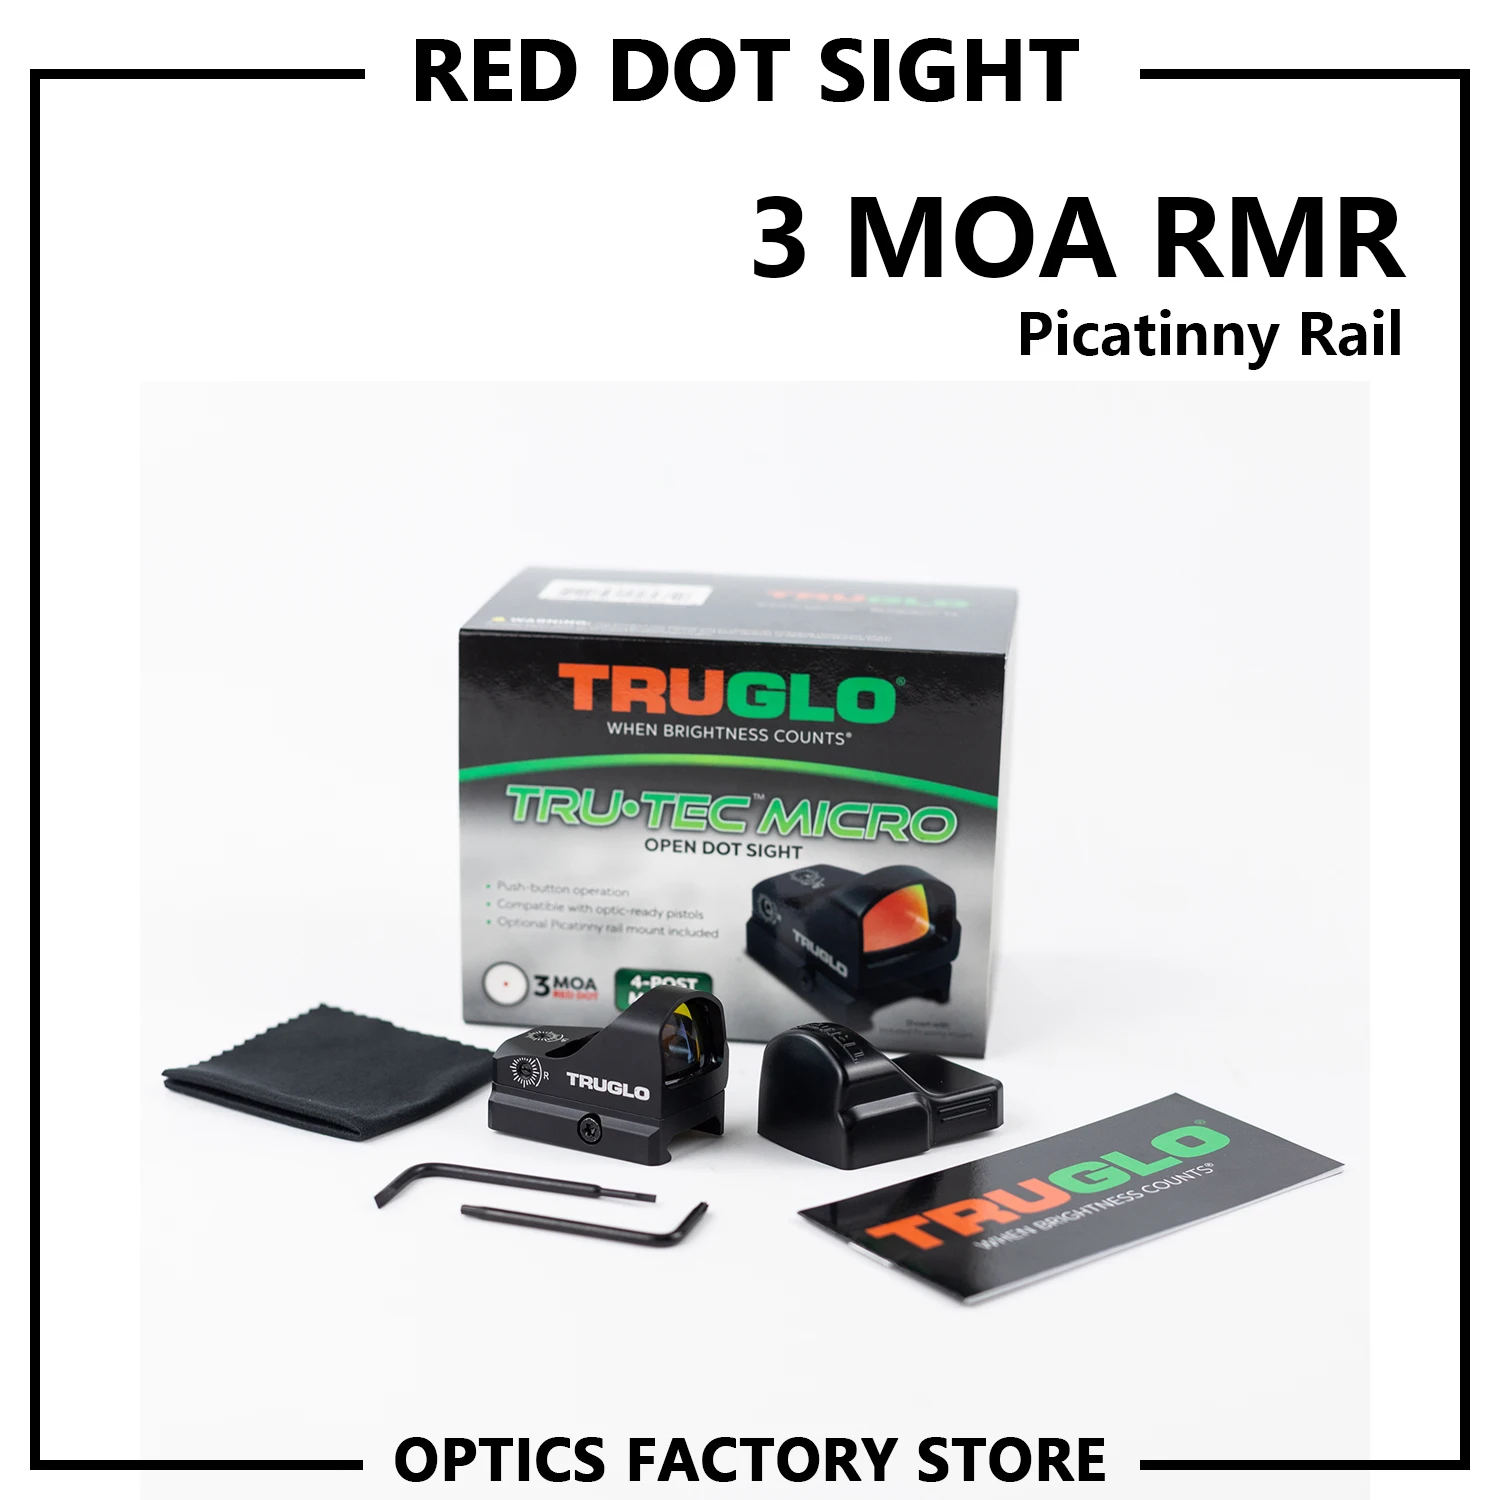 

TRUGLO Lightweight Compact Parallax Free Tactical Red Dot Reflex Scope Optics Riflescope Fit Airsoft Weapons 20mm Rail Hunting